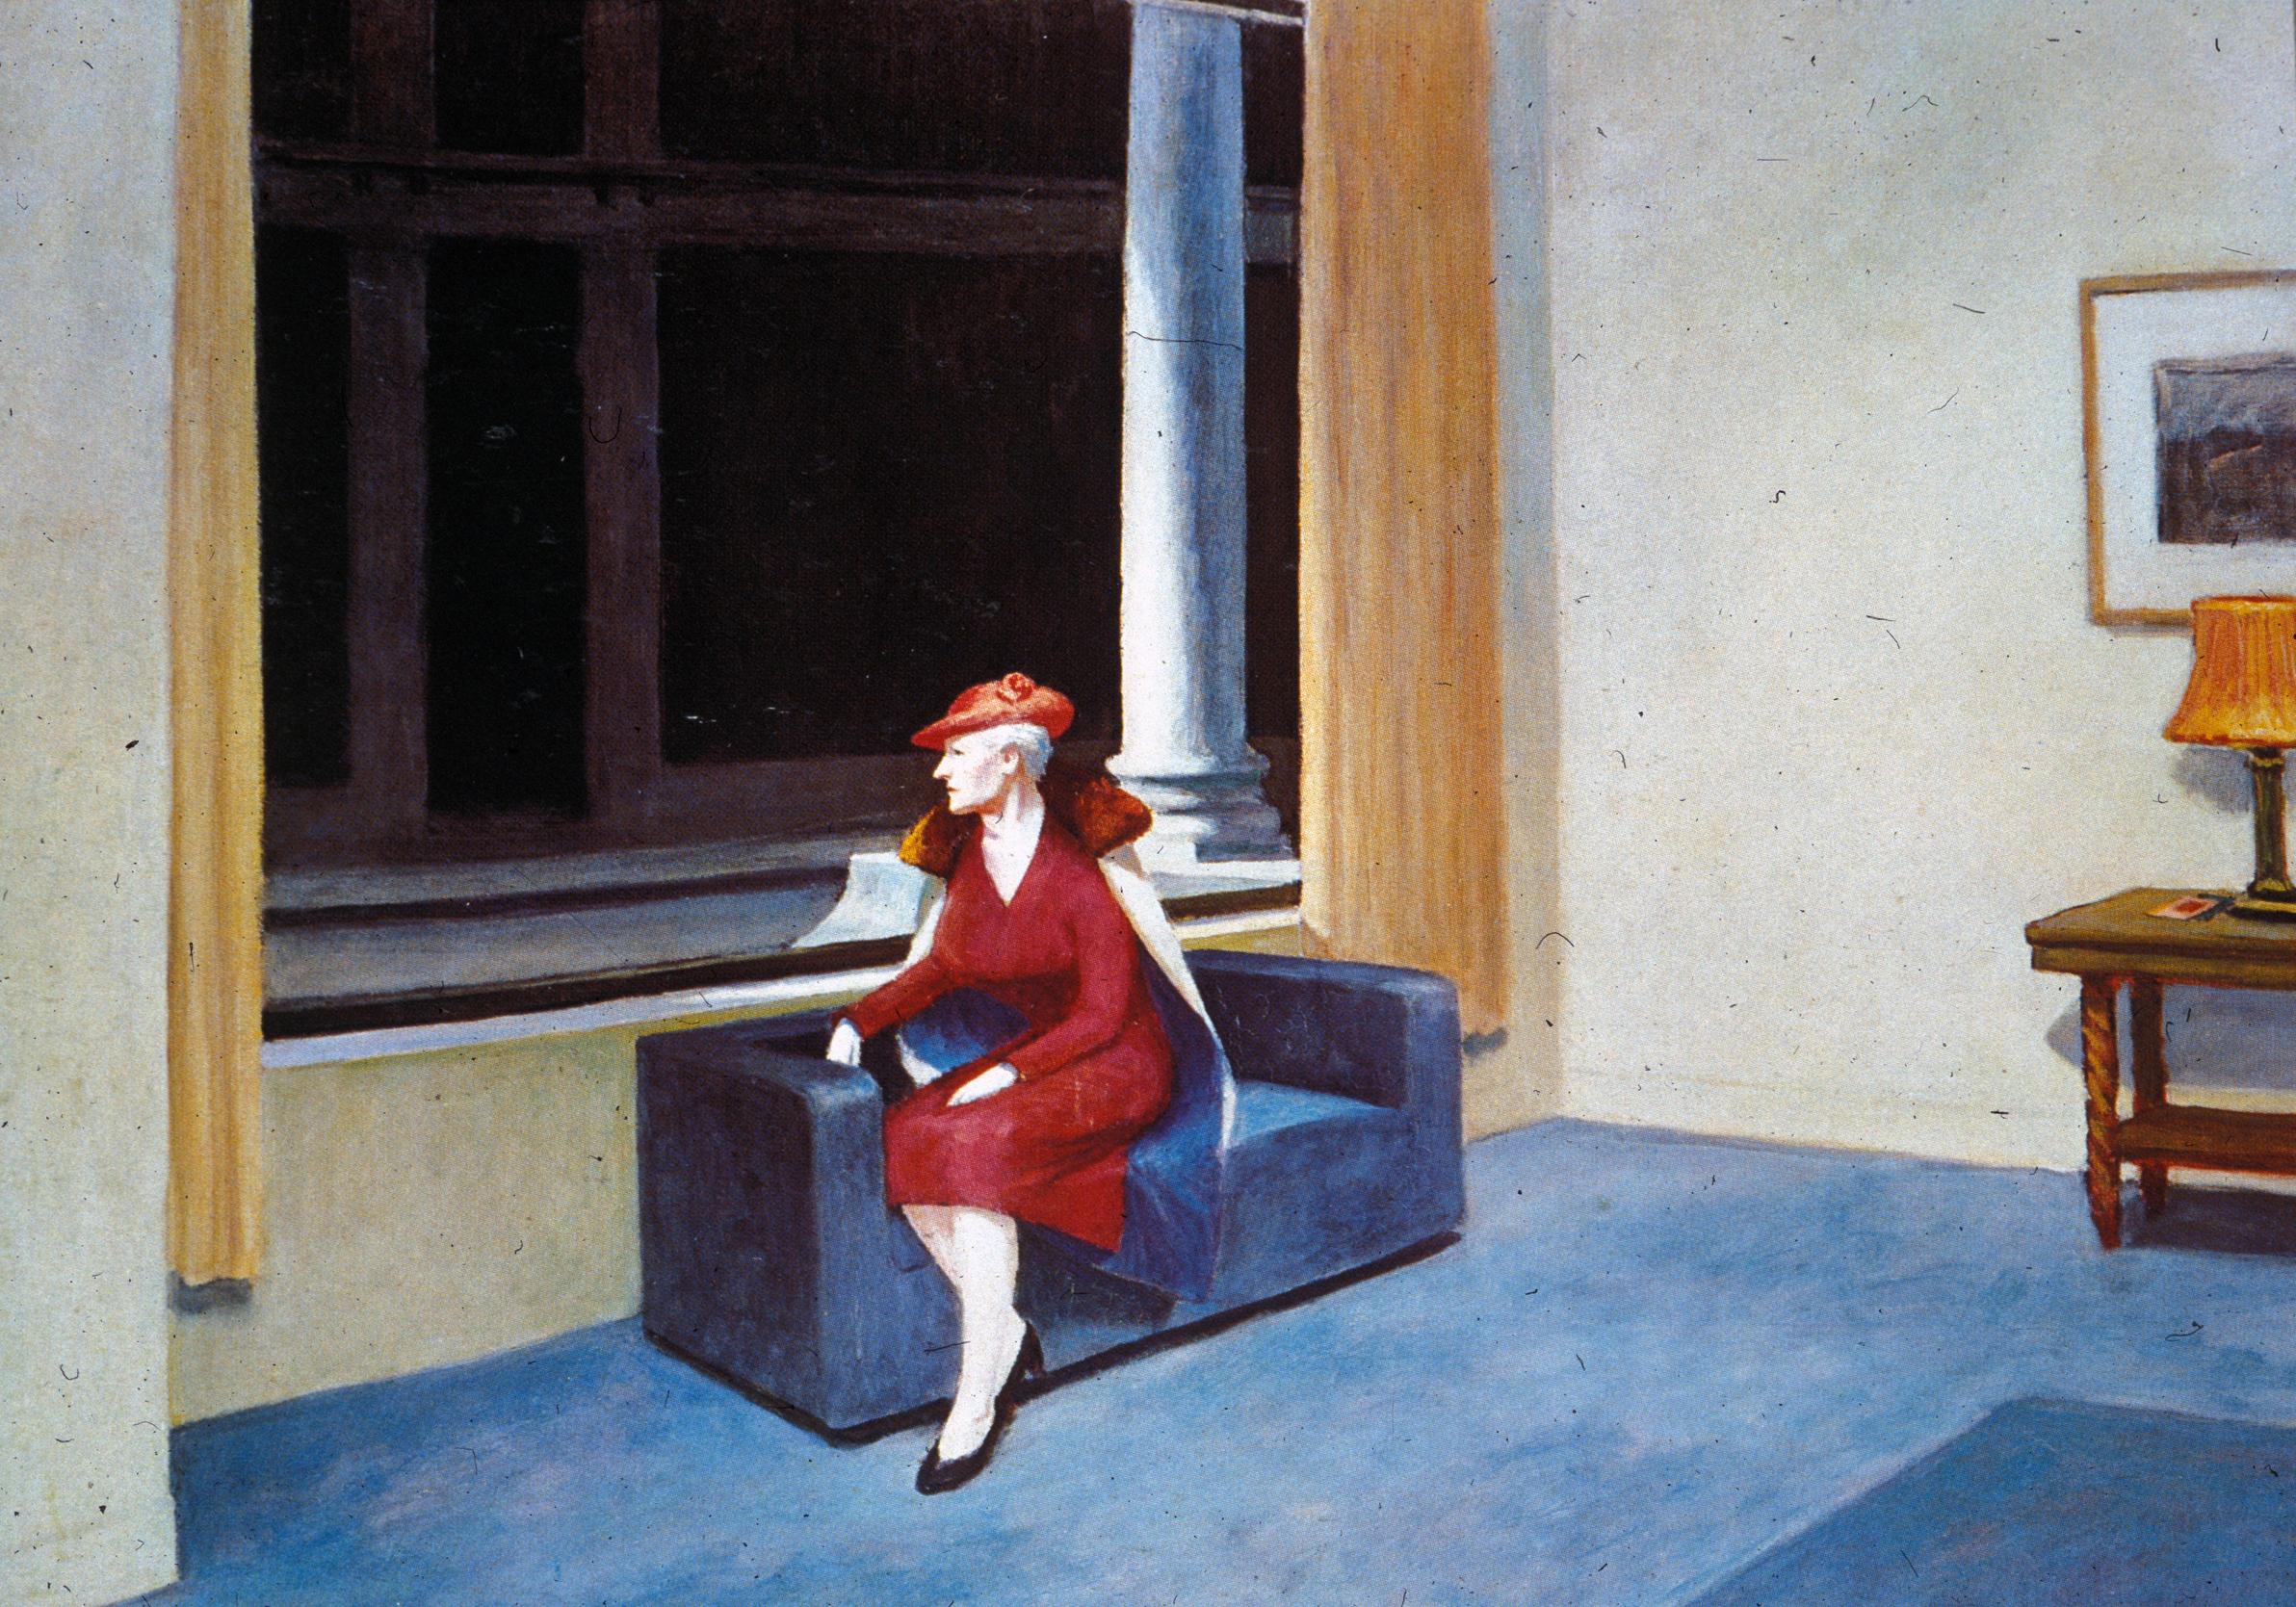 The Hotel Window by Edward Hopper - 1955 - 101.6 x 139.7 cm private collection